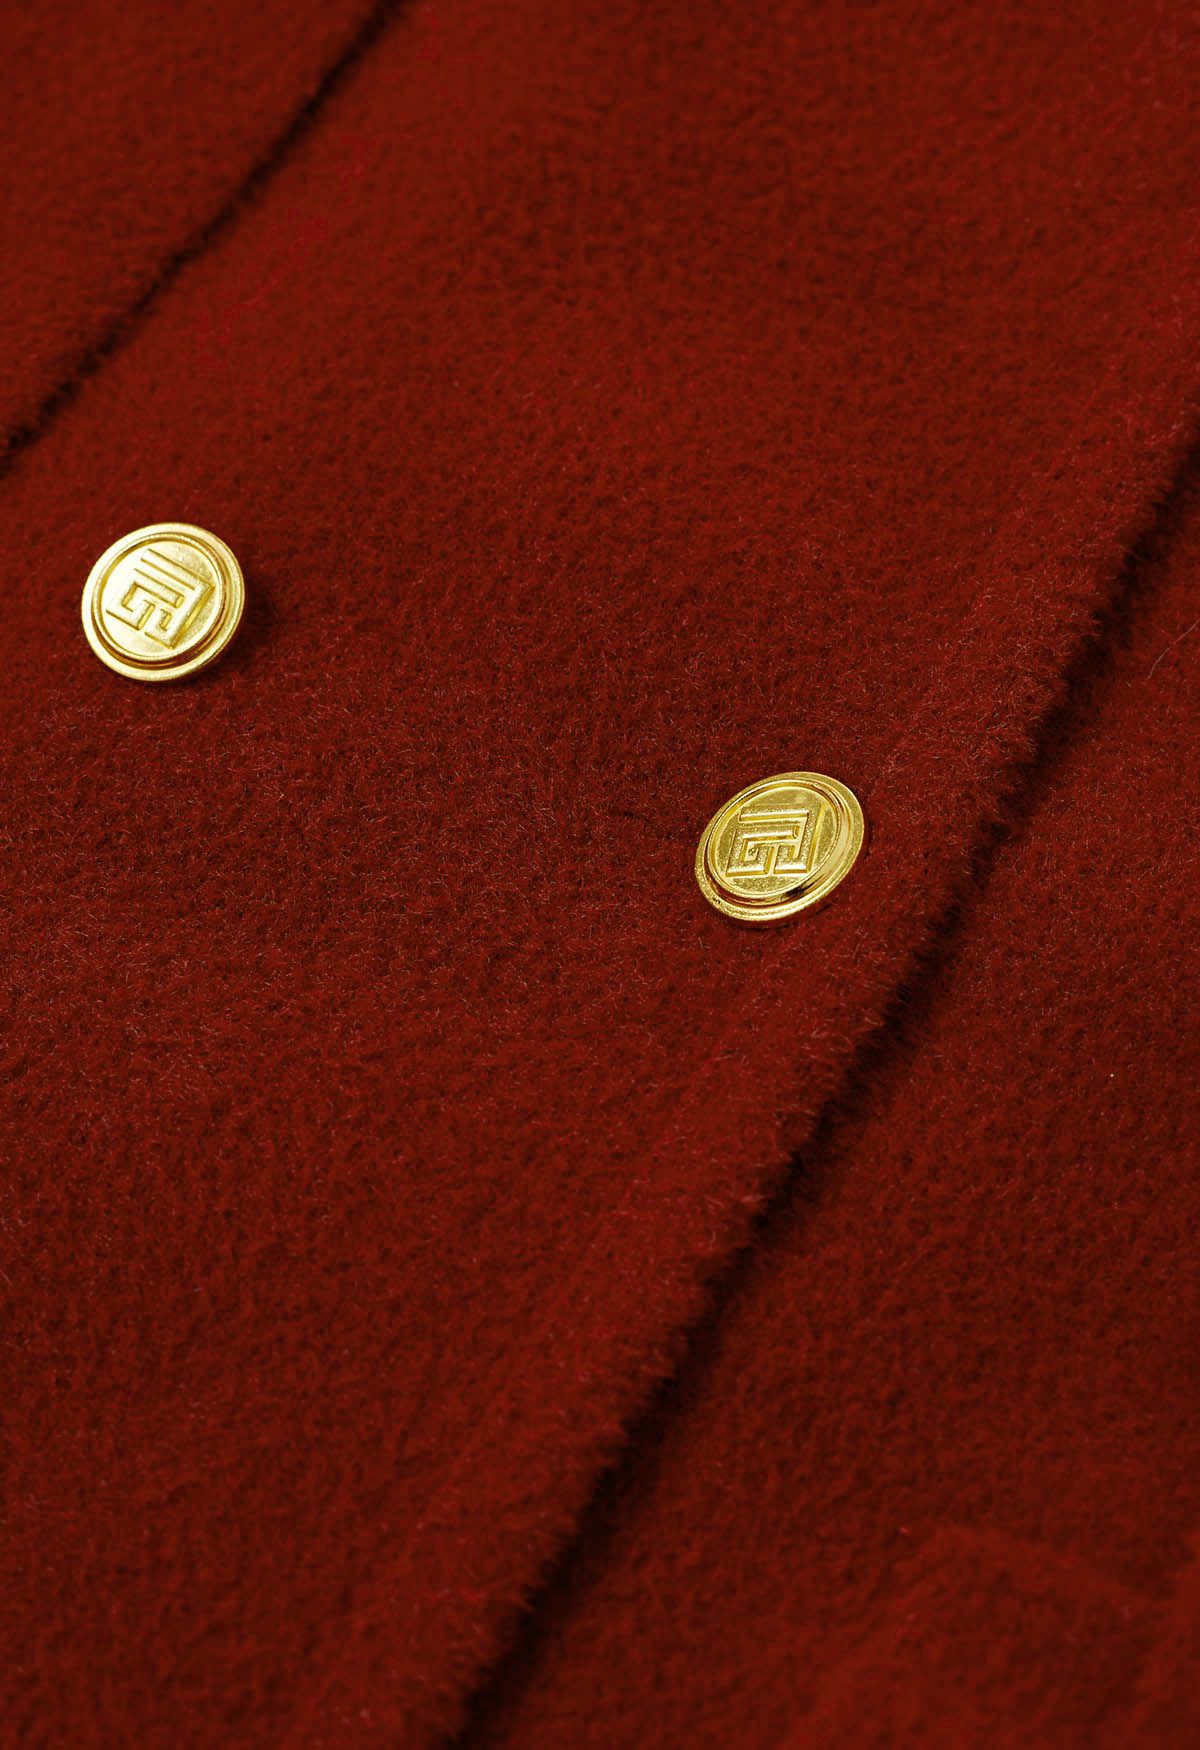 Turtleneck Double-Breasted Twinset Cape Coat in Red